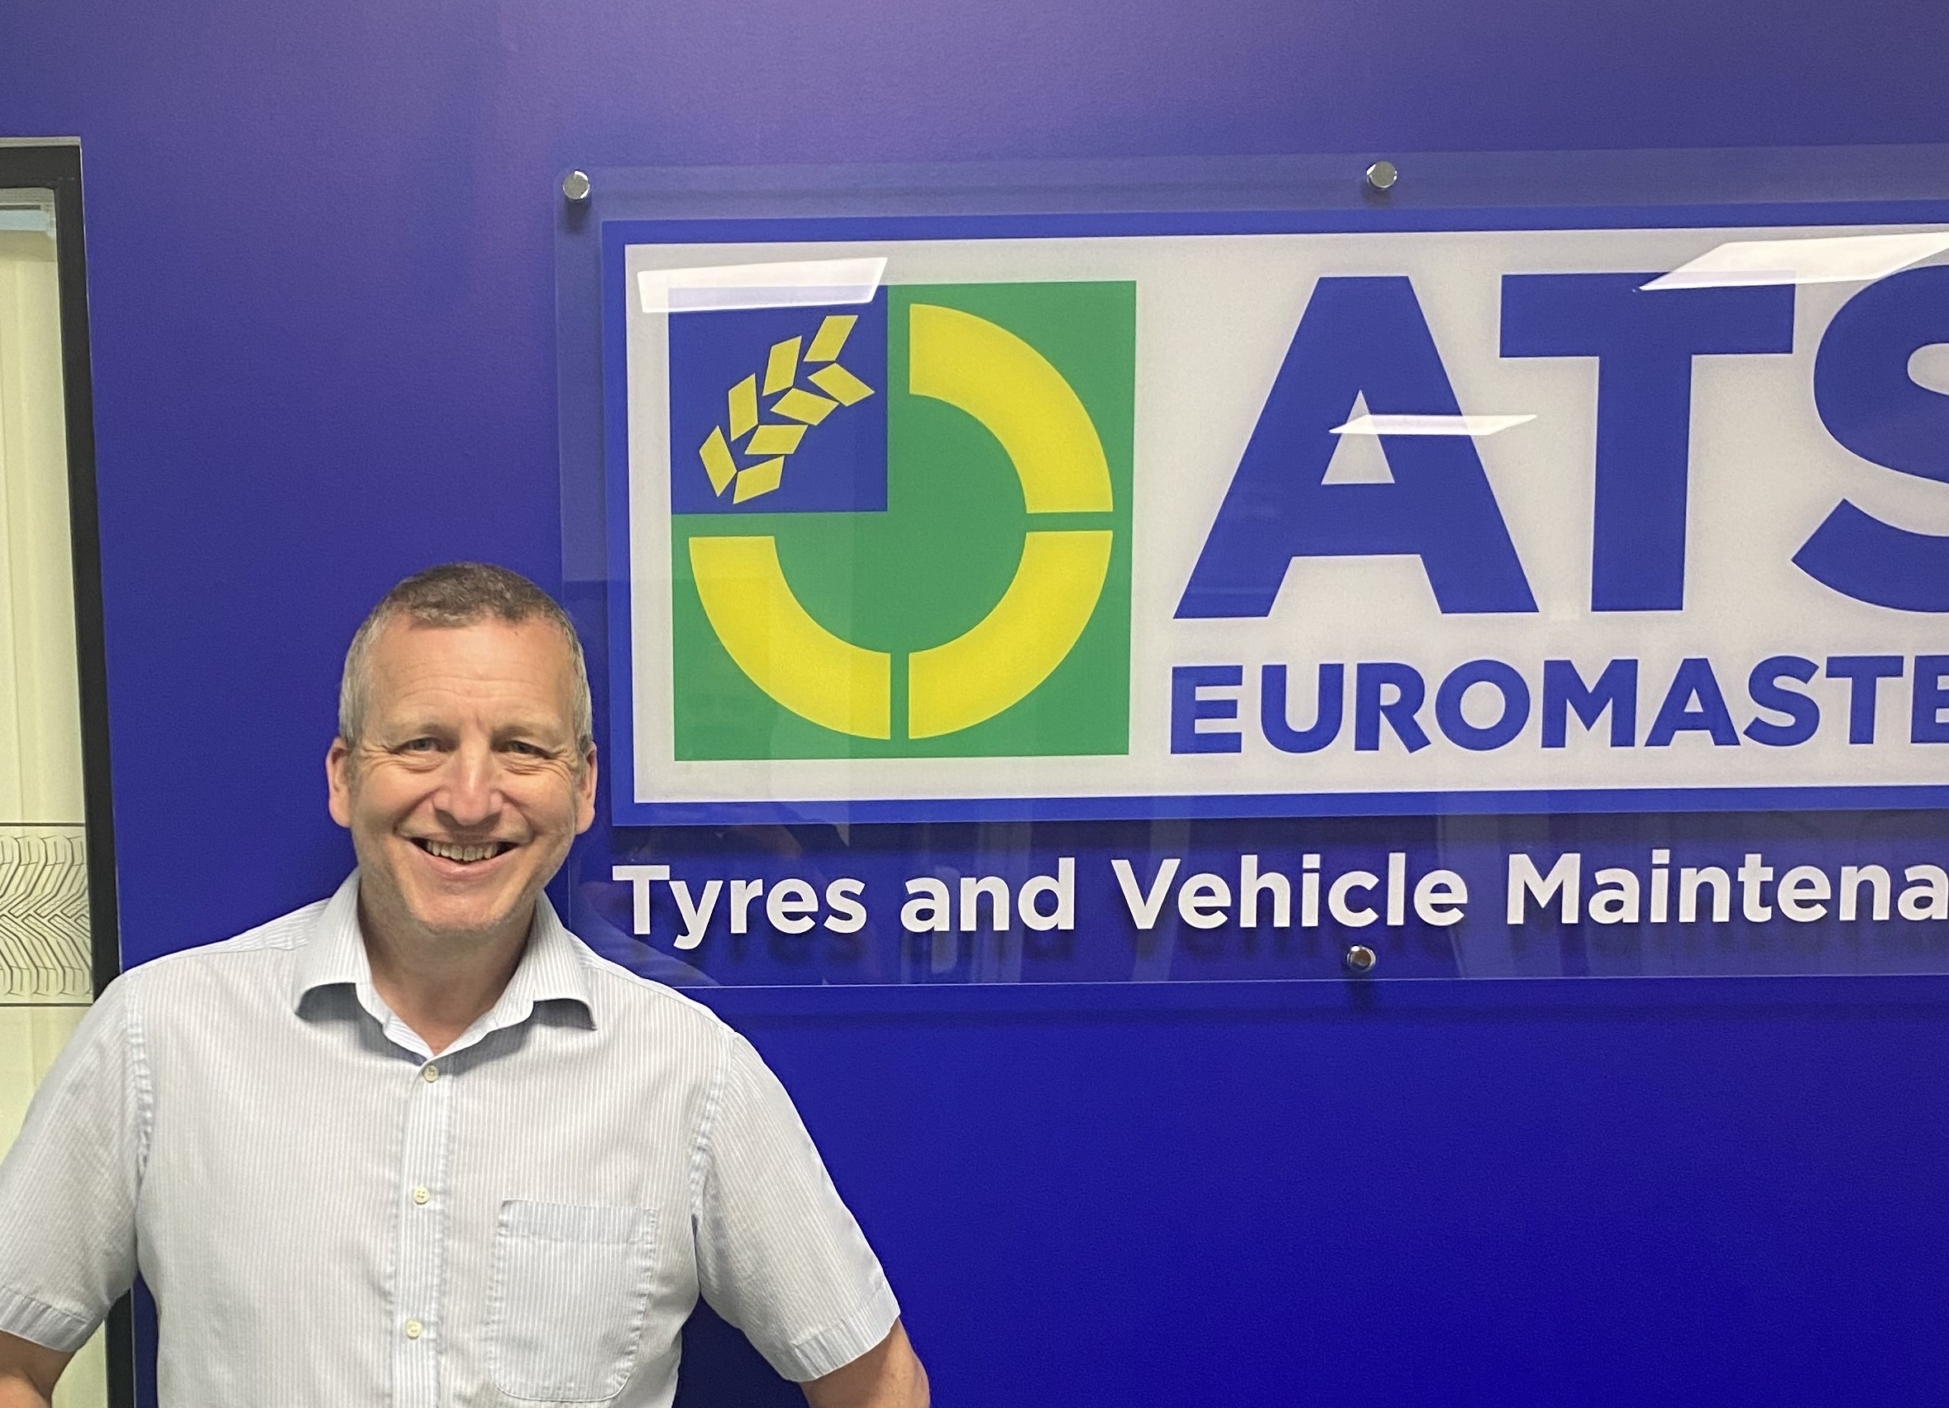 ATS Euromaster appoints Gary Butterworth as central operations manager